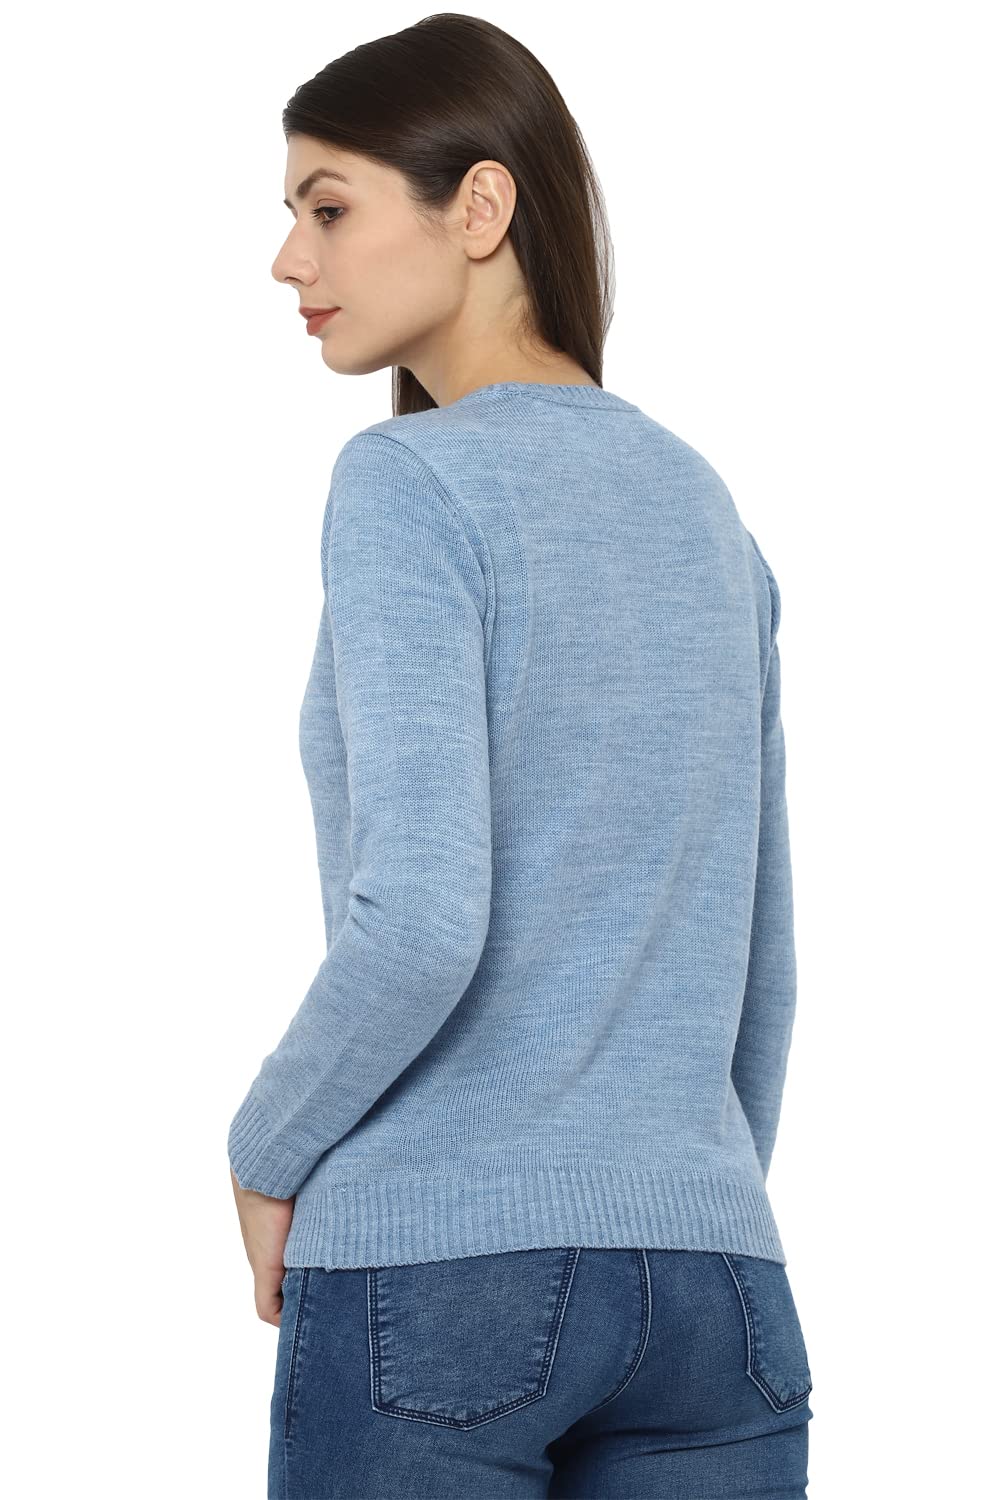 Allen Solly Women's Synthetic Pullover (AHSWCRGPA99092_Blue_M) 